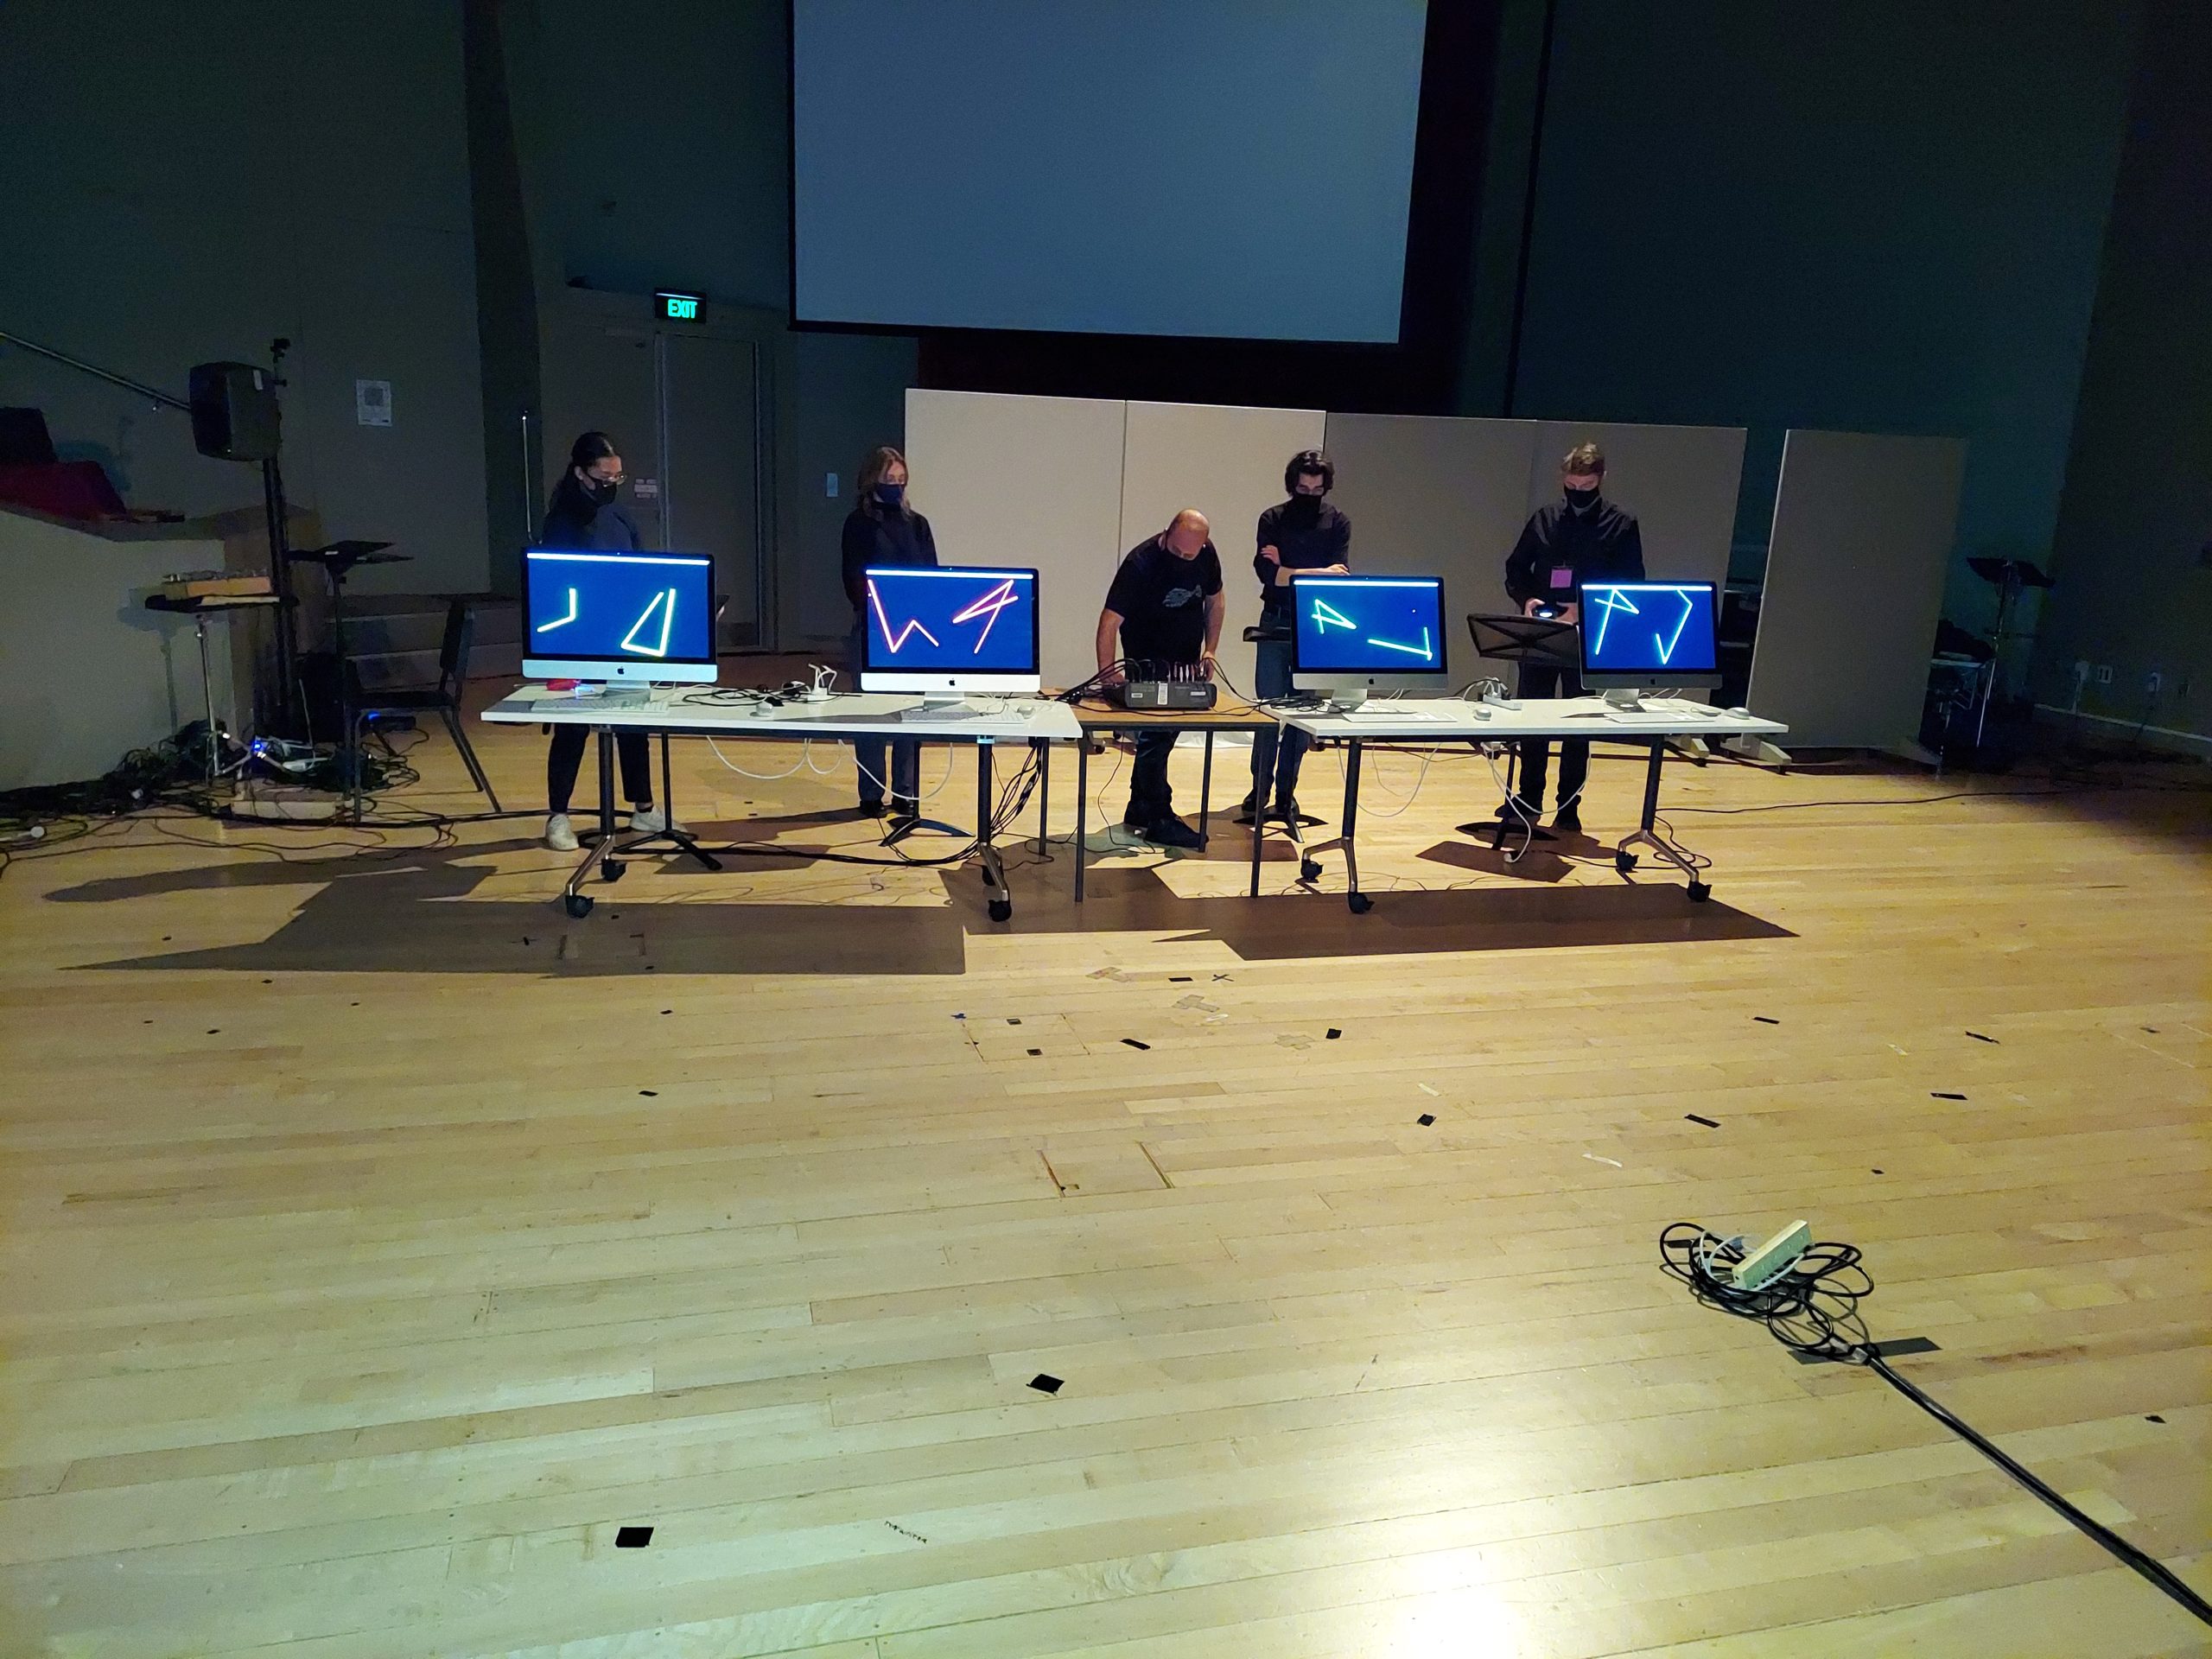 Computer terminals with visuals and audio triggered by 4 PlayStation controllers during a performance of Joo Won Park's PS Quartet No. 1 